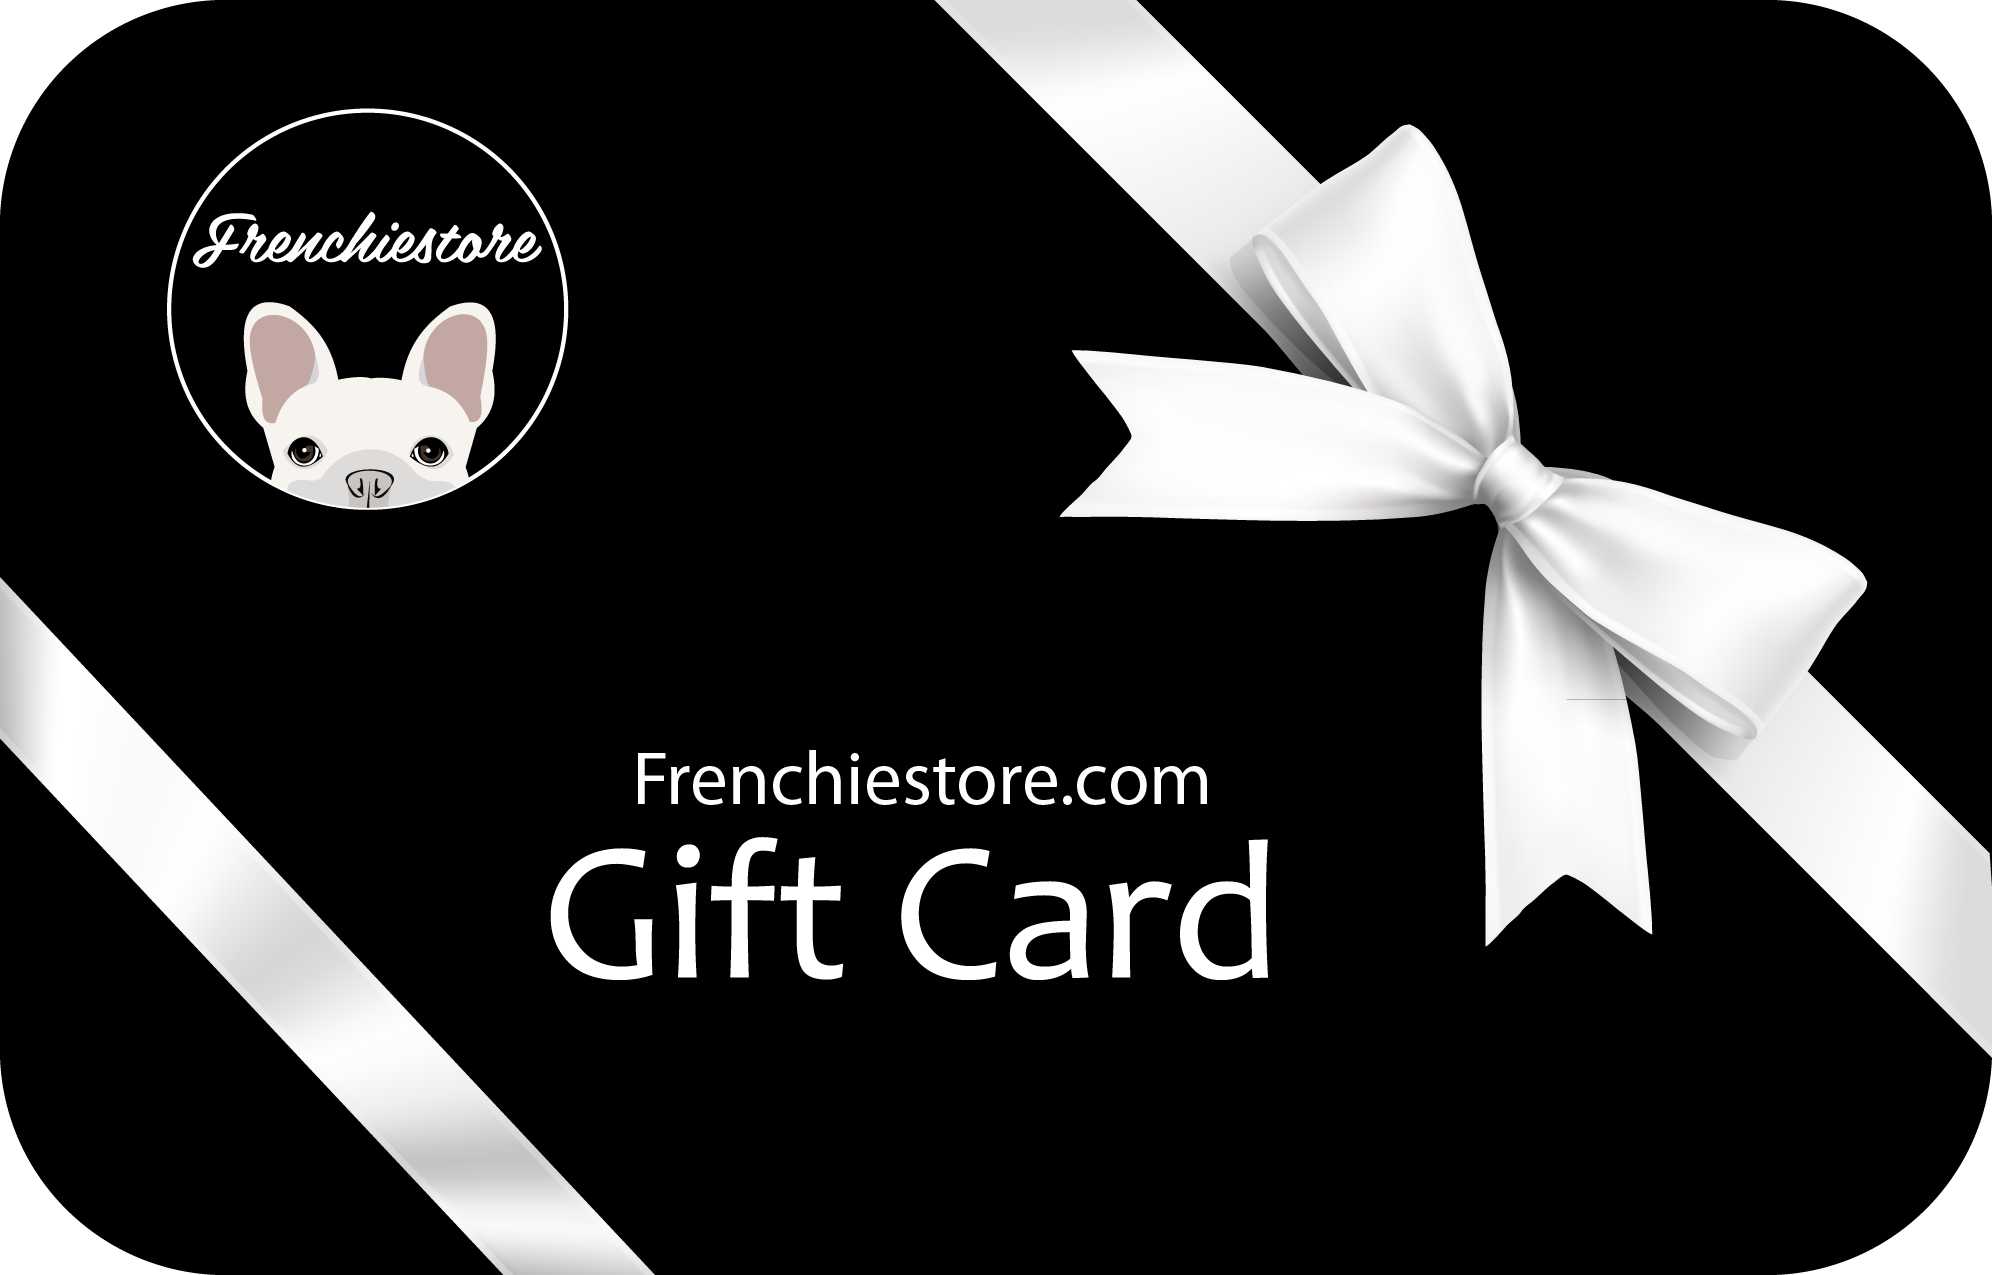 Frenchiestore Gift Card for the Frenchie obsessed!, Frenchie Dog, French Bulldog pet products